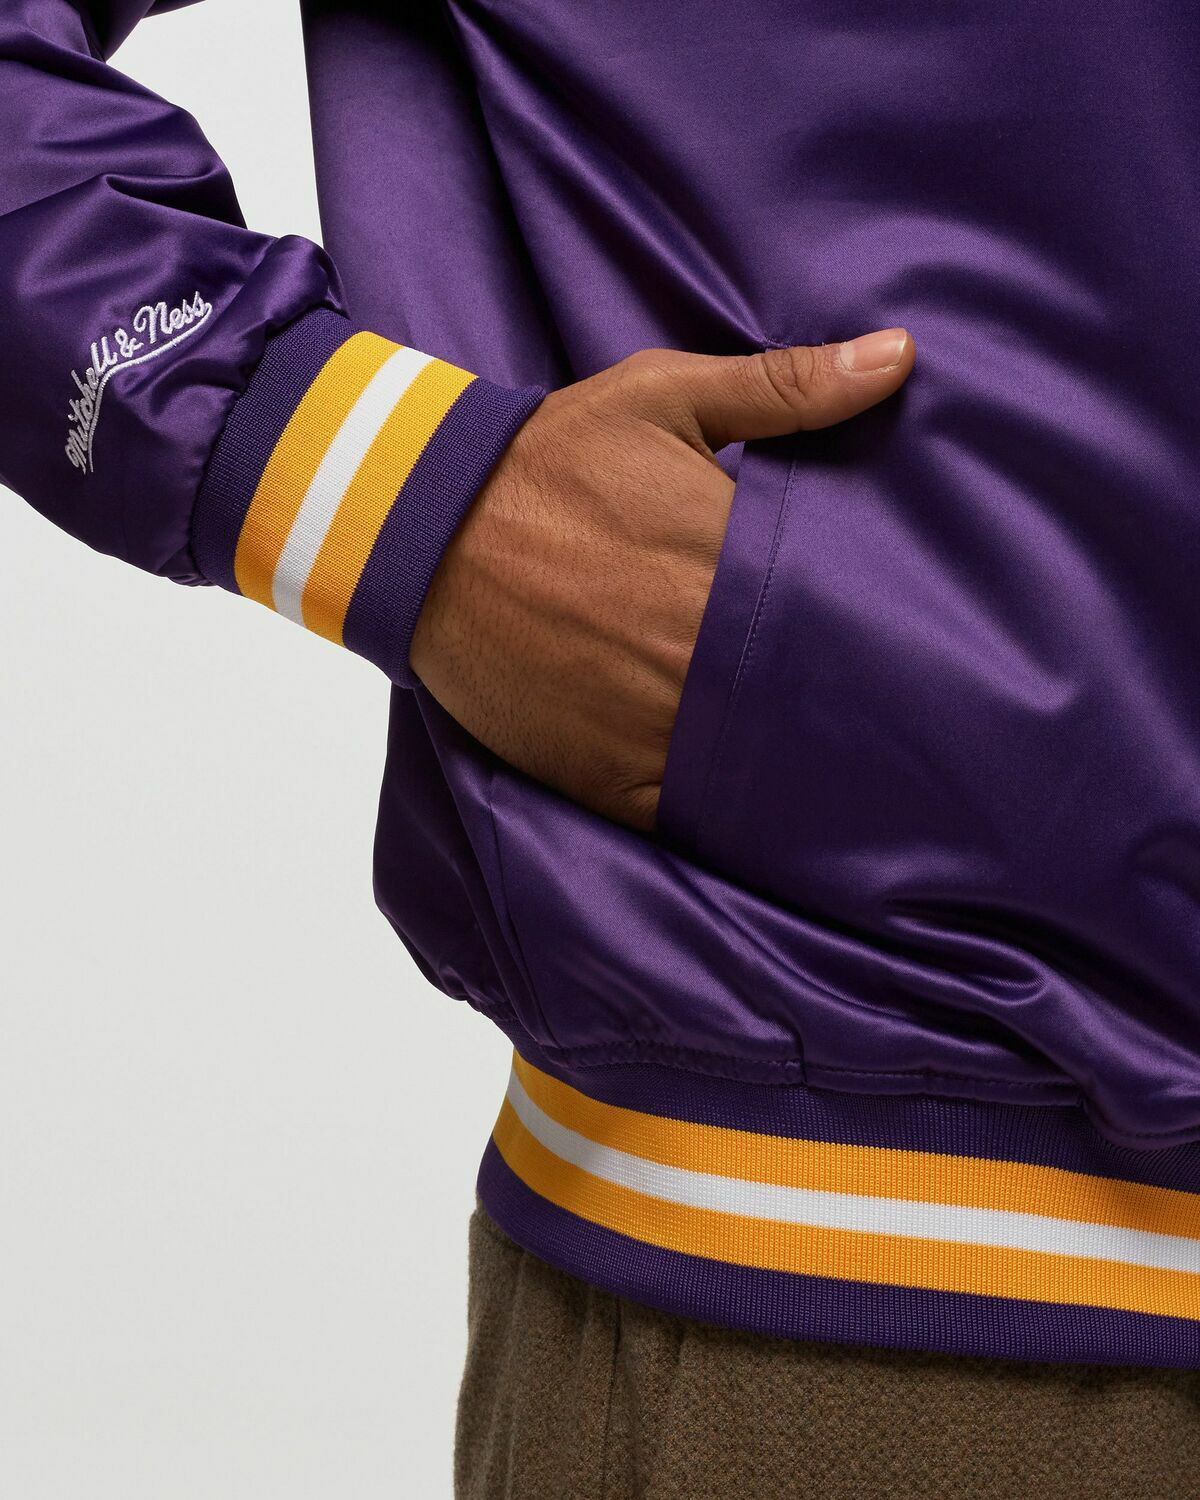 Lightweight Satin Jacket Los Angeles Lakers White